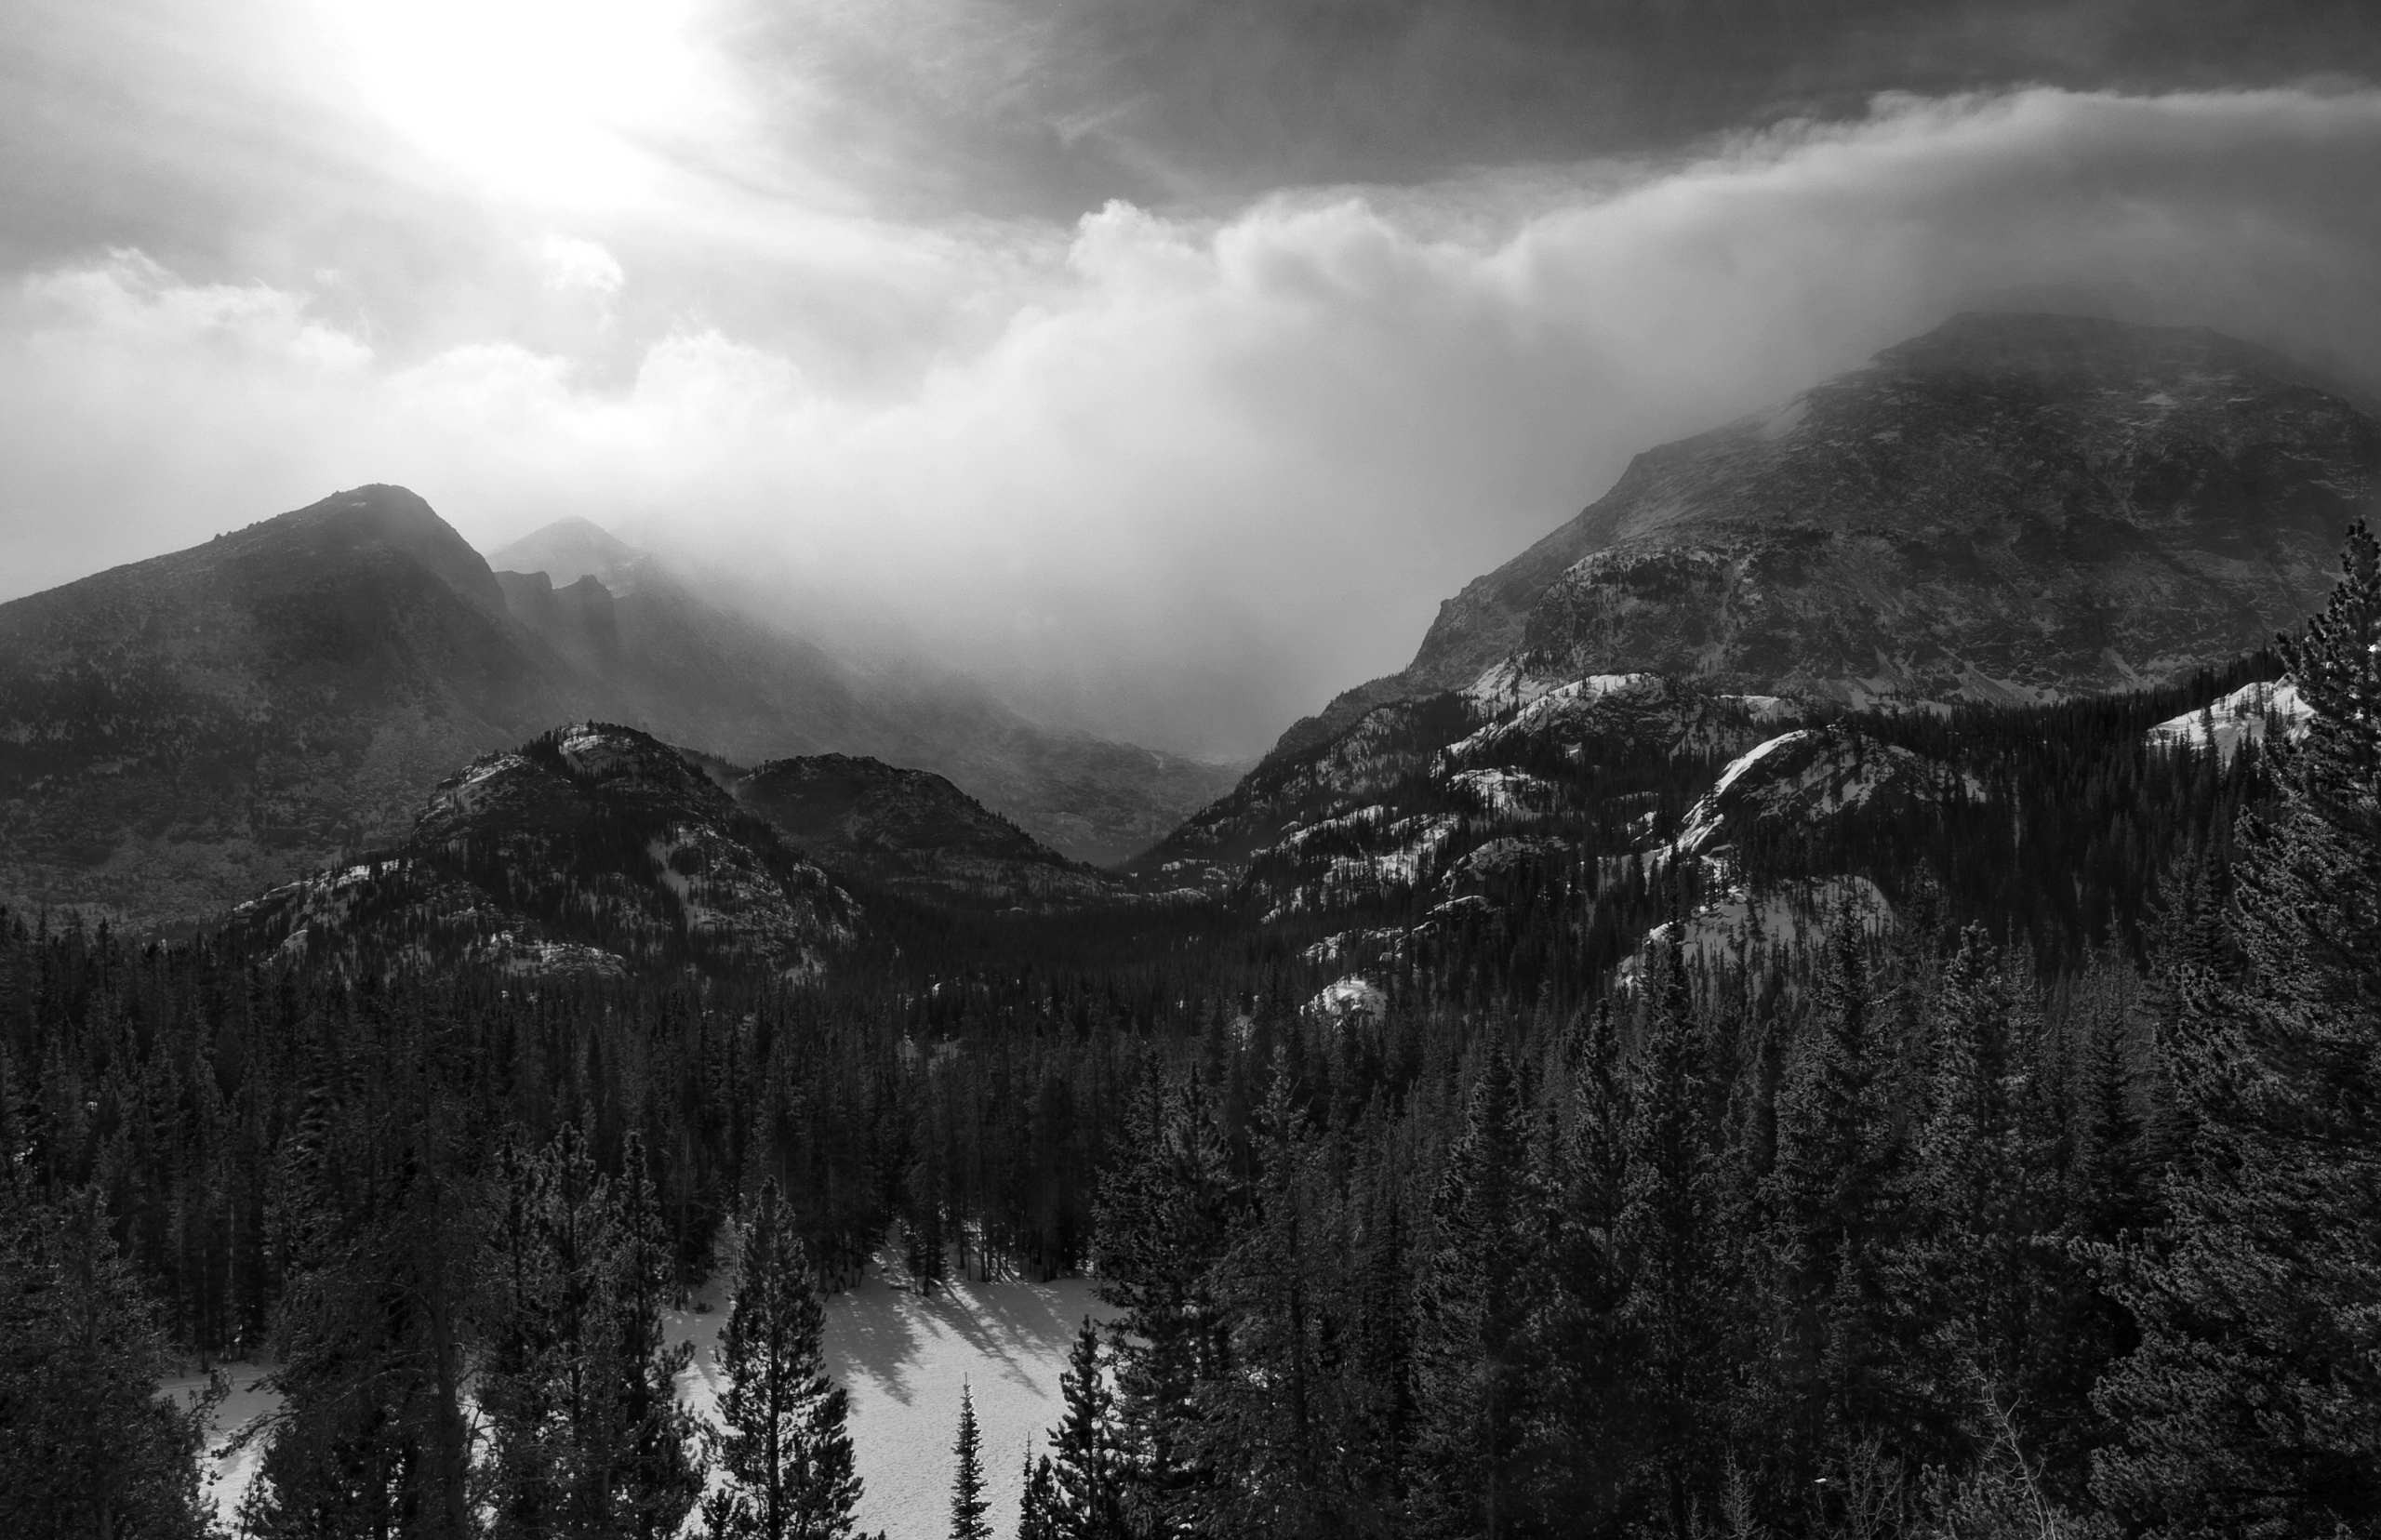 Free Download Black And White Mountains Woods Wallpaper Forwallpapercom 2560x1656 For Your Desktop Mobile Tablet Explore 44 Black And White Woods Wallpaper Wood Hd Wallpaper The Woods Wallpaper Black Wood Wallpaper